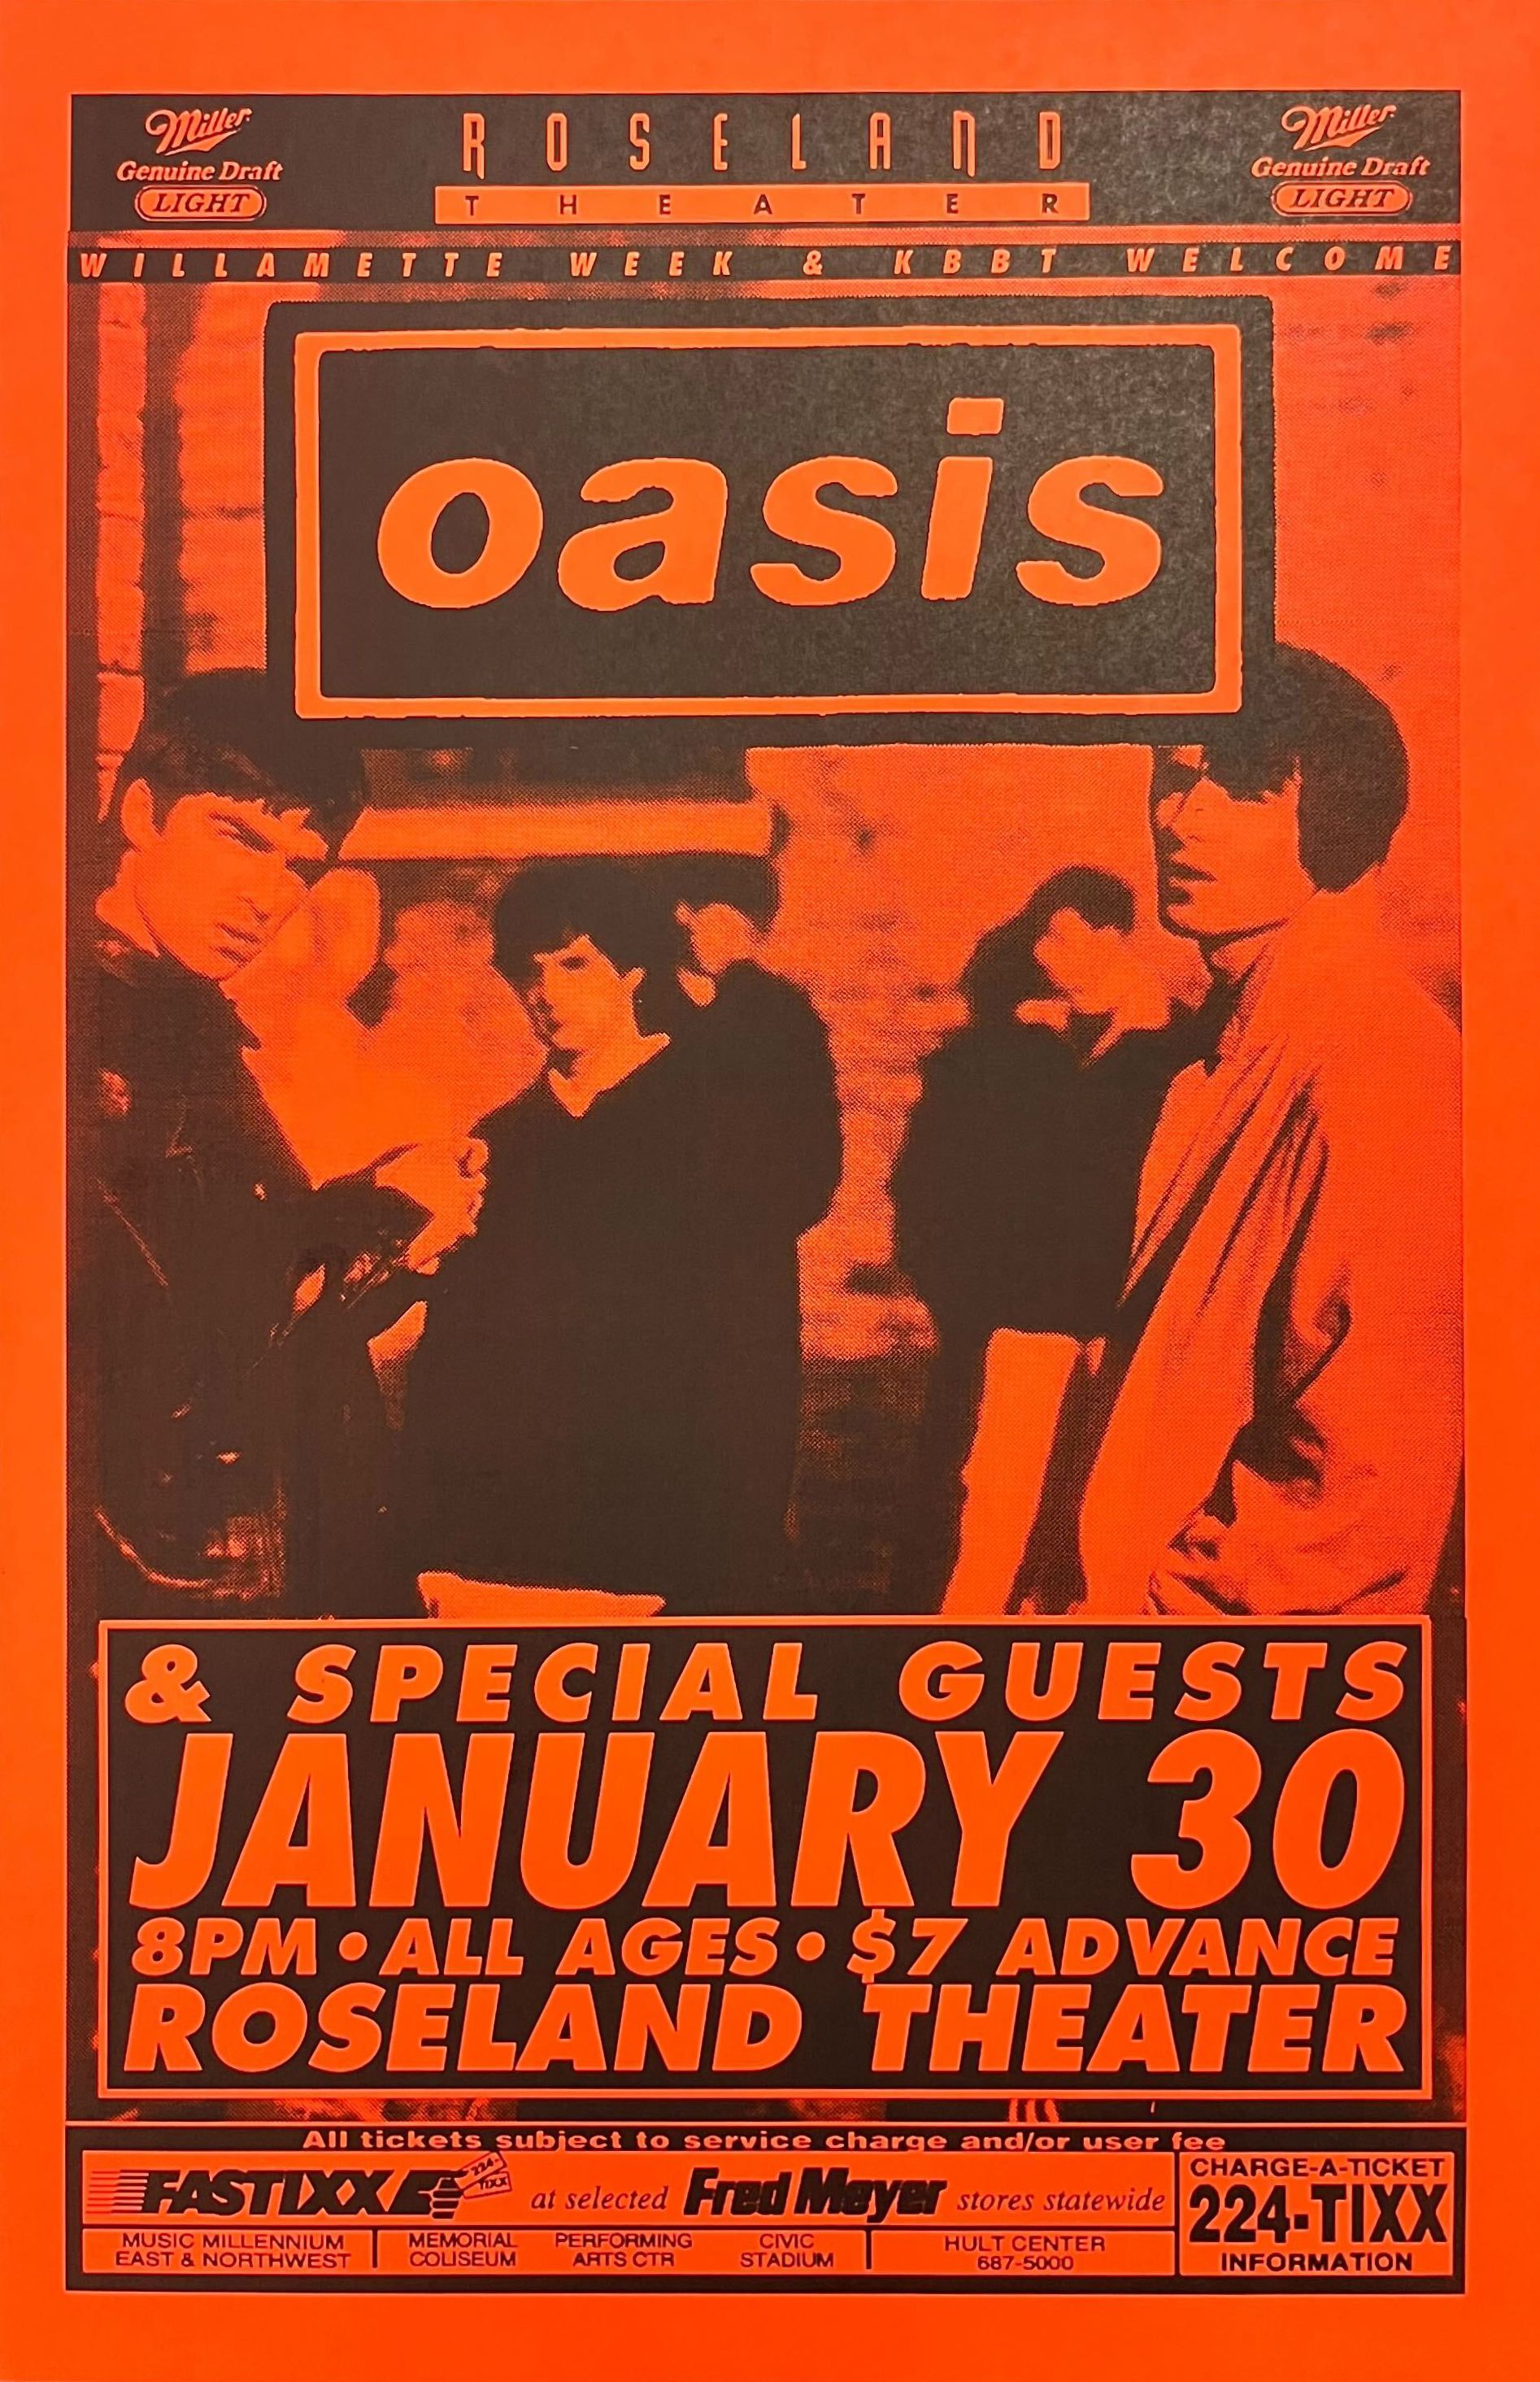 Oasis Roseland Theater 1999 Concert Poster